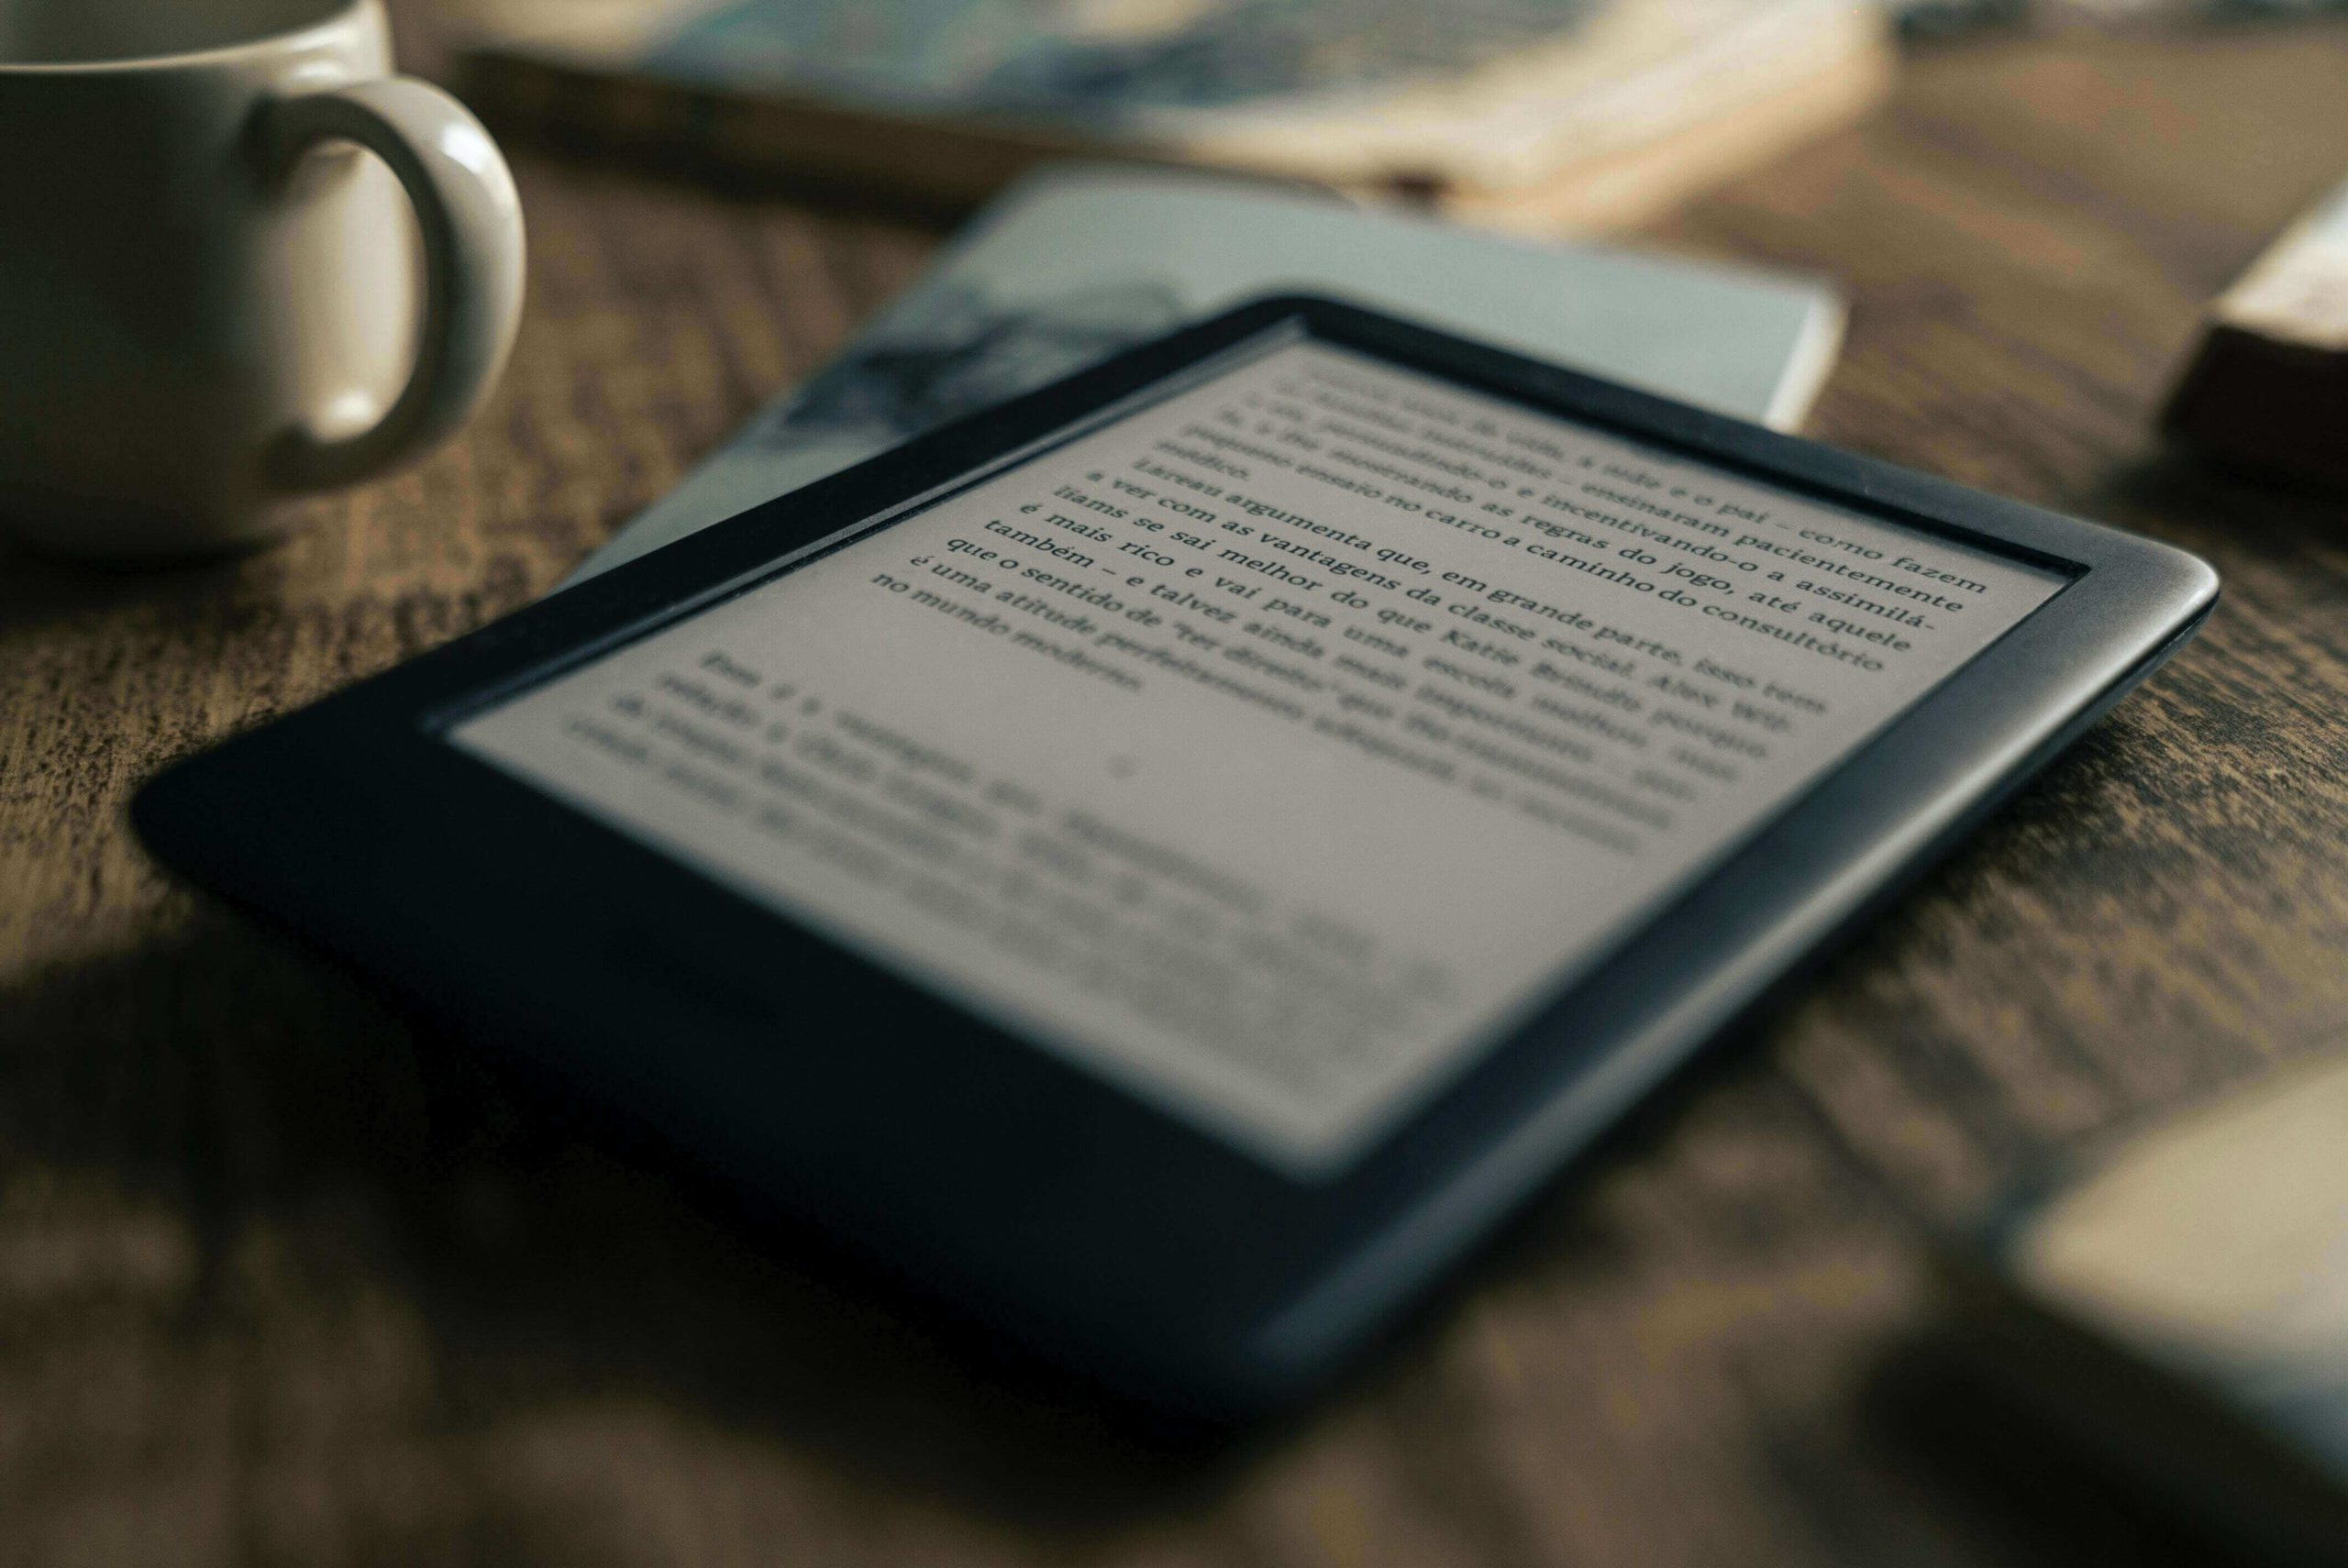 A kindle and cup of coffee